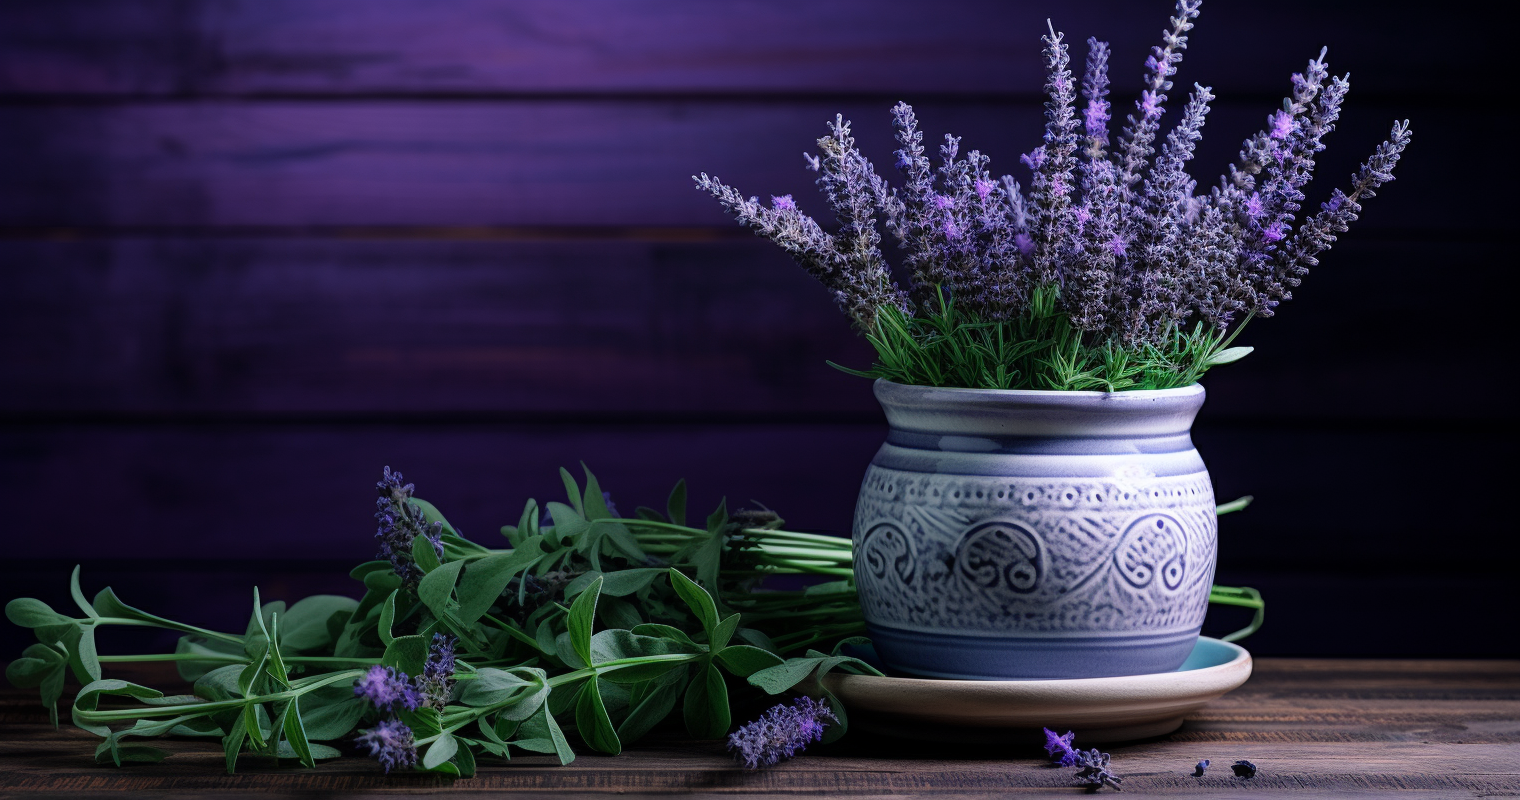 Houseplant surrounded by lavender and mint